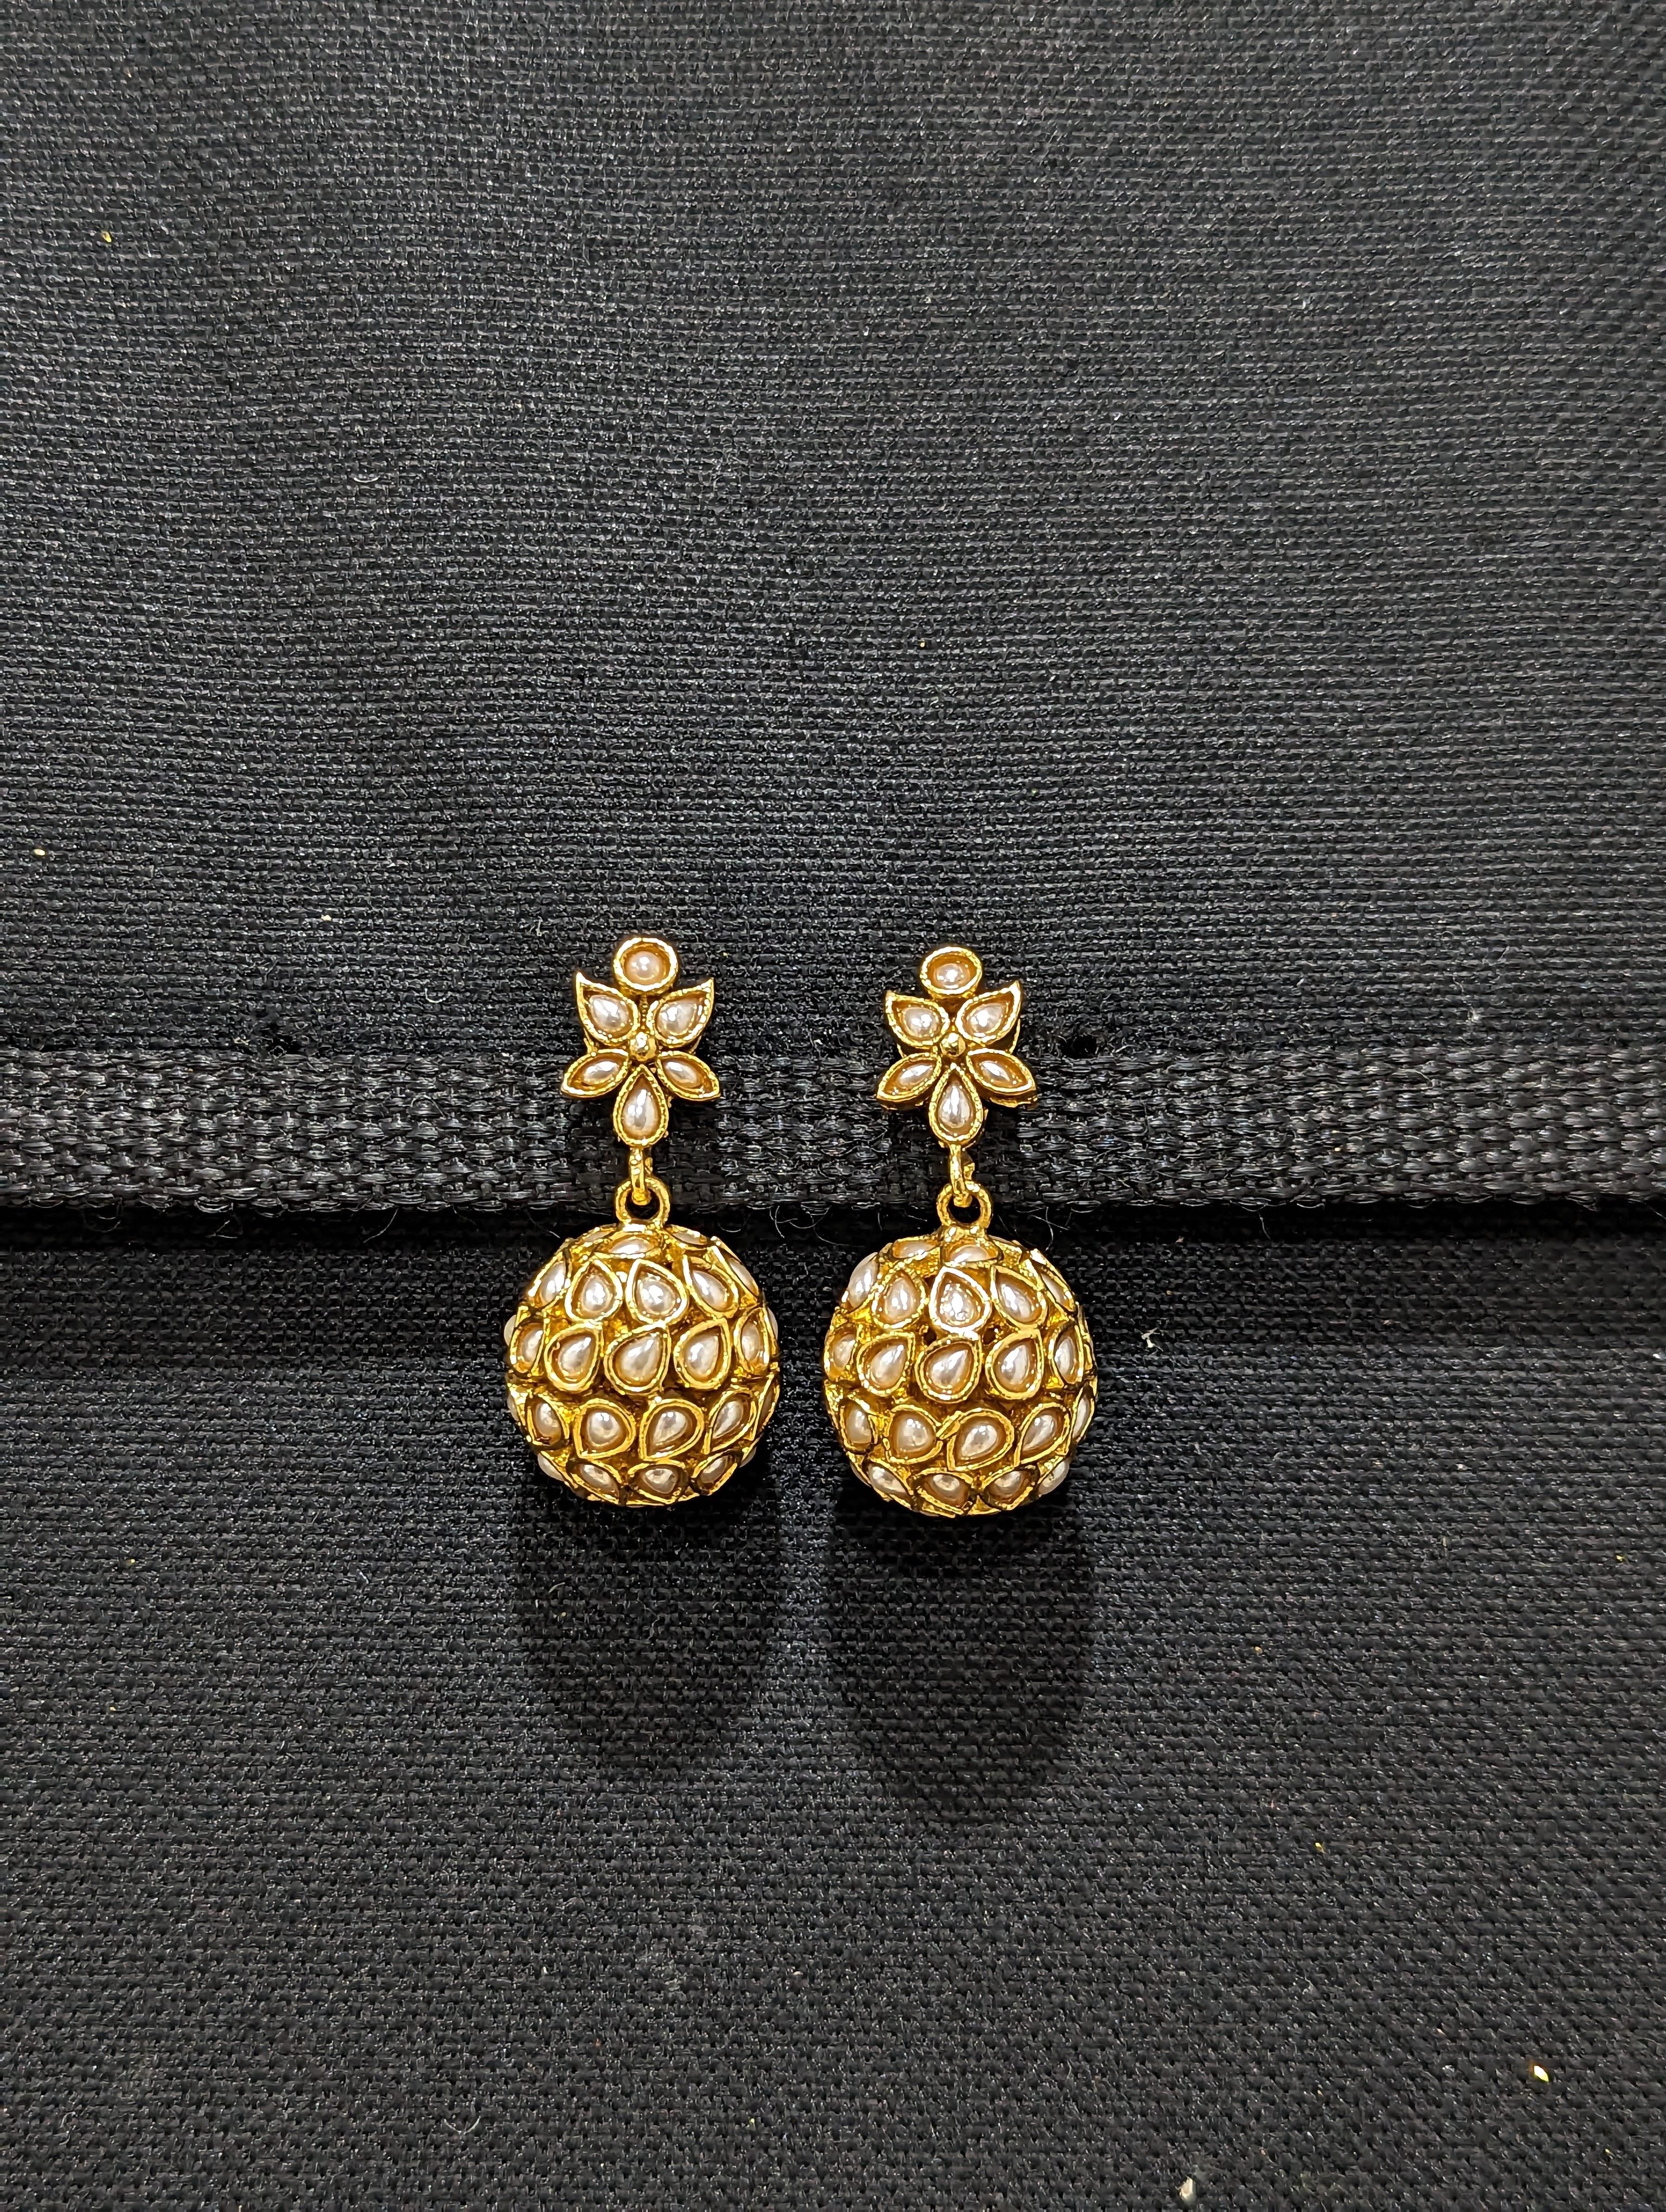 Buy Pretty Ponytails Traditional Small Jhumka Ethnic Gold Jhumki Drop  Earrings at Amazon.in